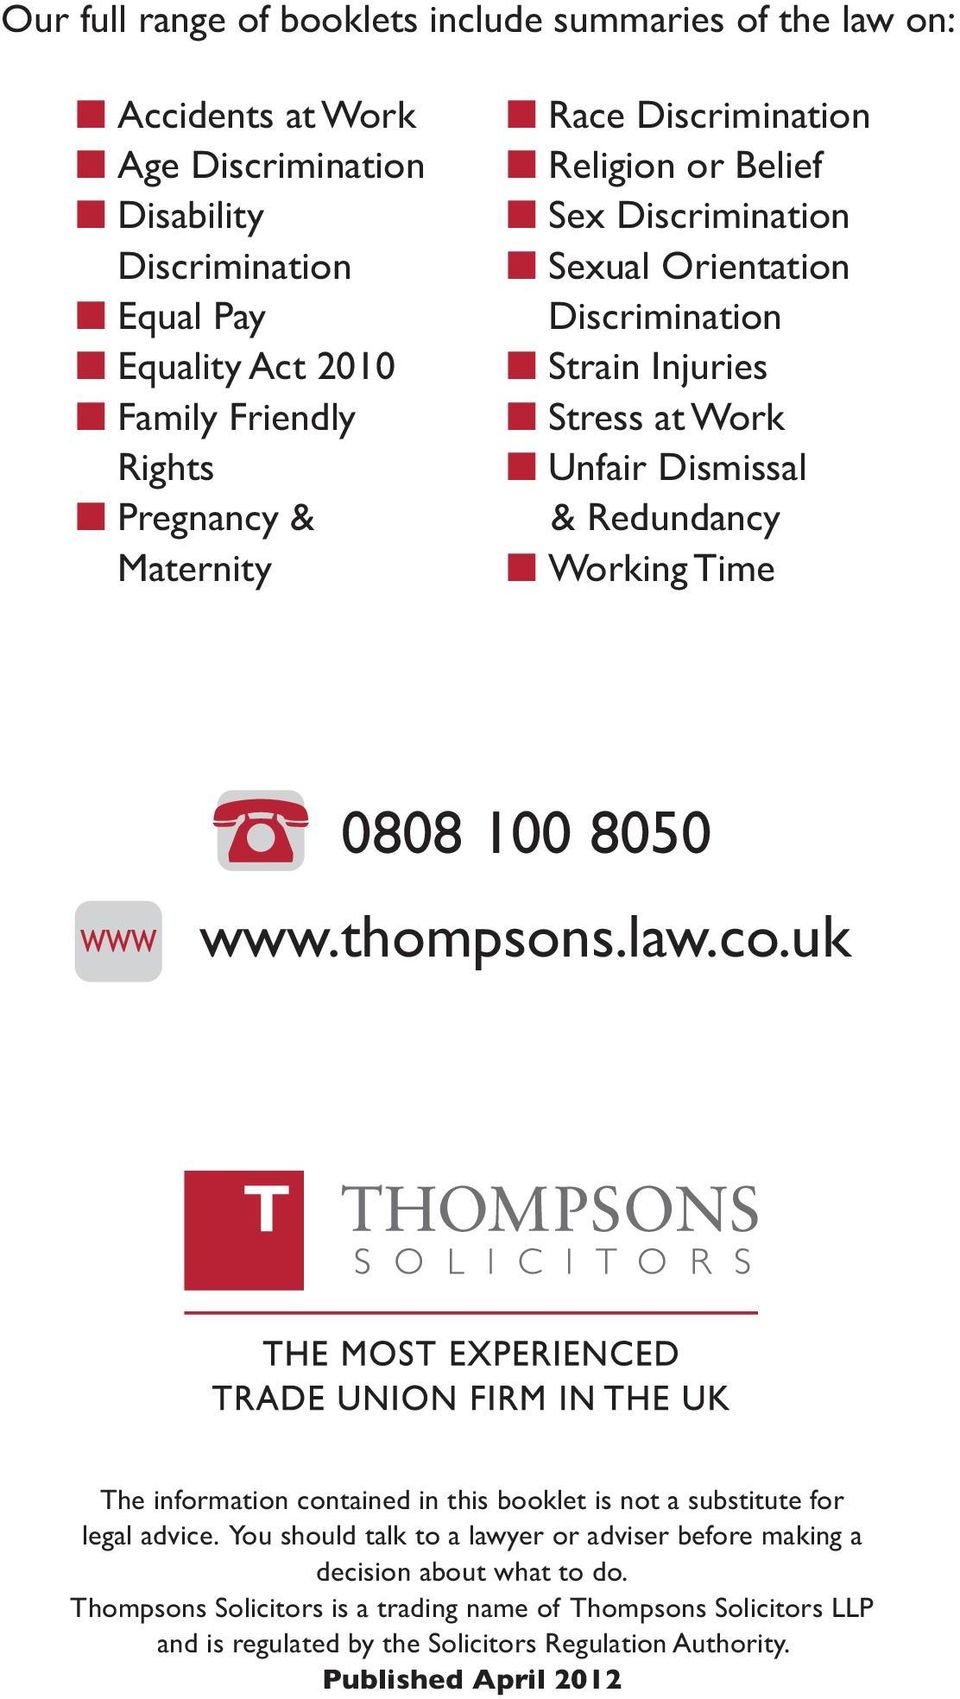 Working Time 0808 100 8050 www.thompsons.law.co.uk The information contained in this booklet is not a substitute for legal advice.